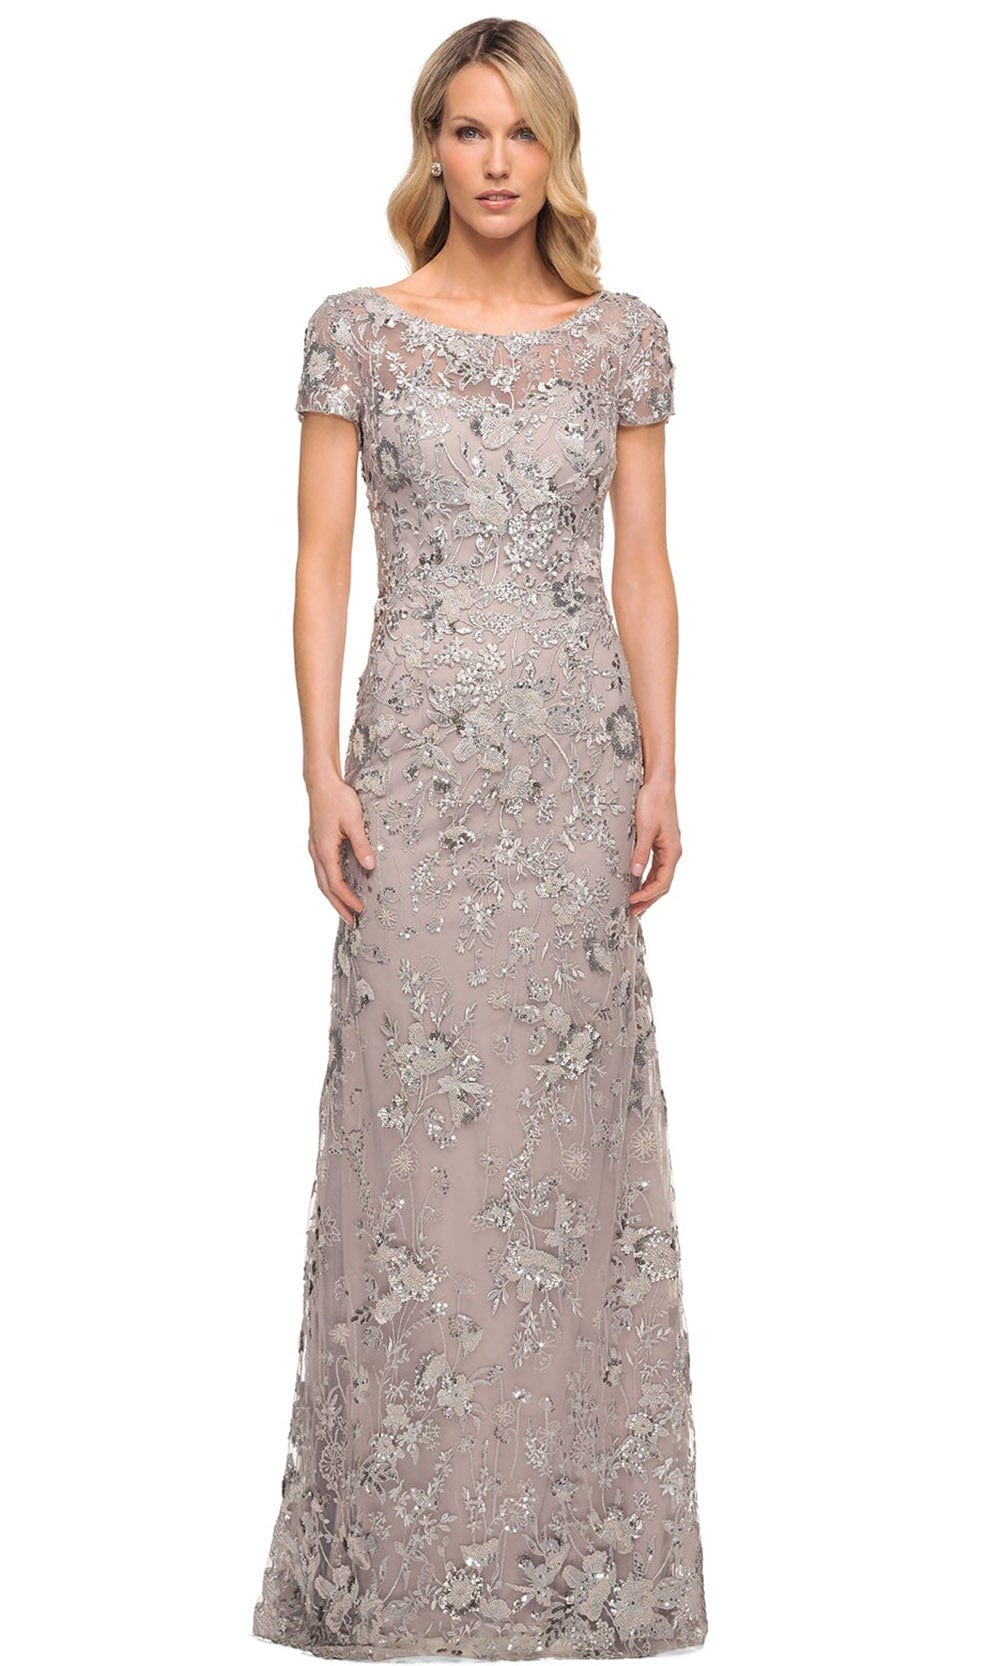 Image of La Femme 30053 - Embroidered Mother of the Groom Sheath Dress